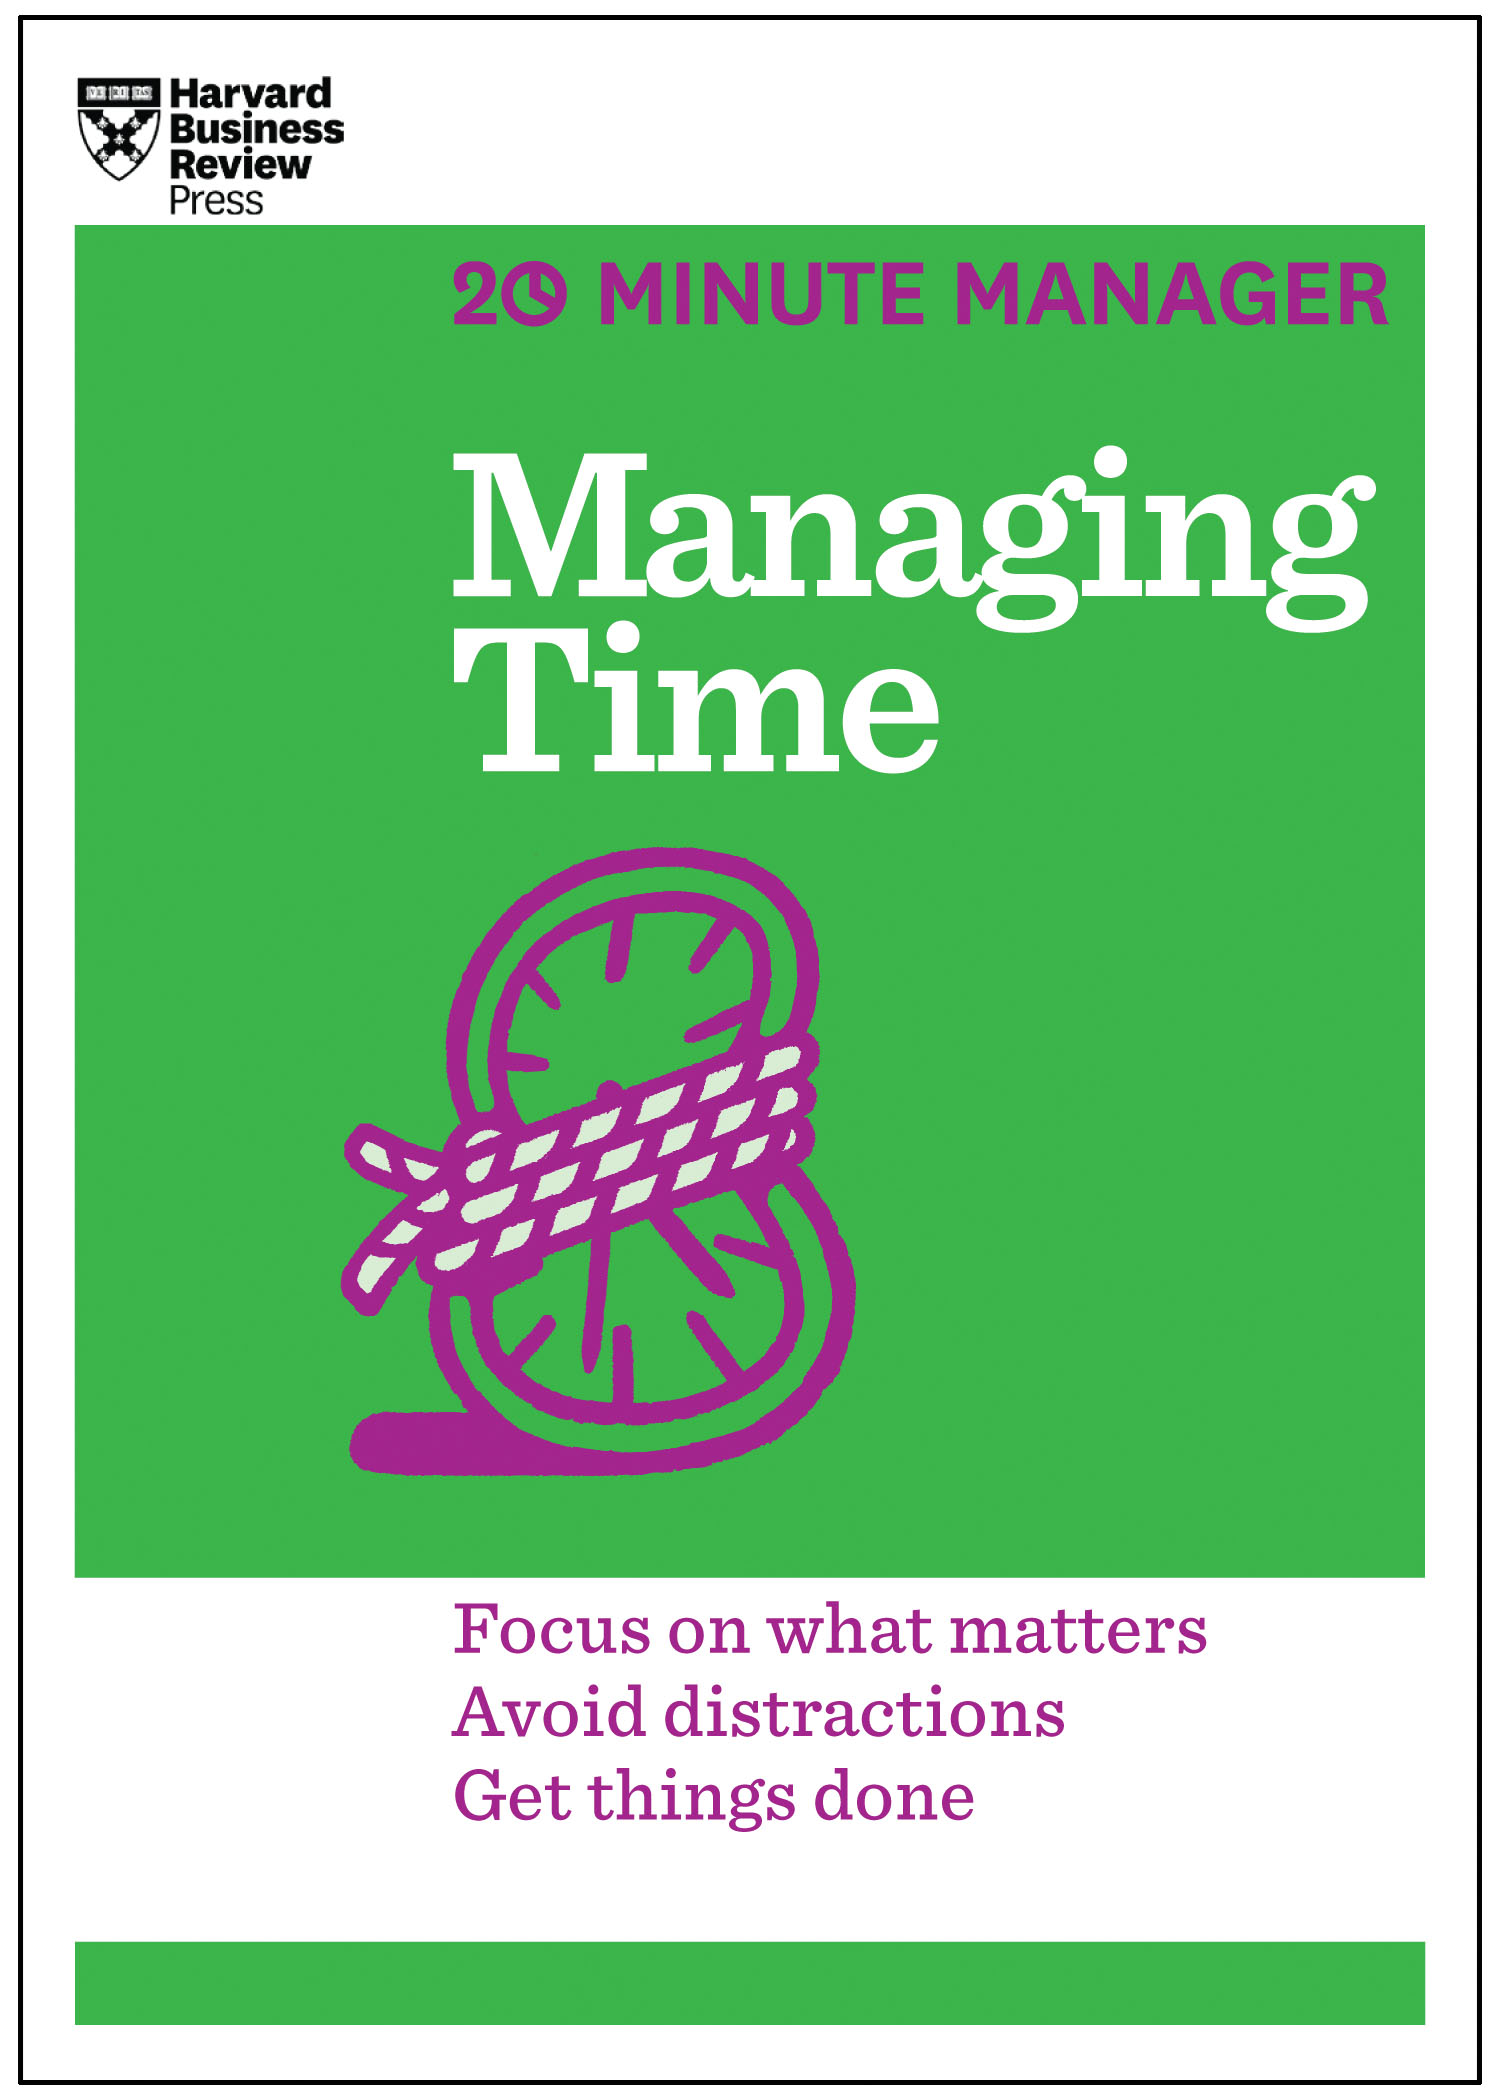 harvard business review on managing people